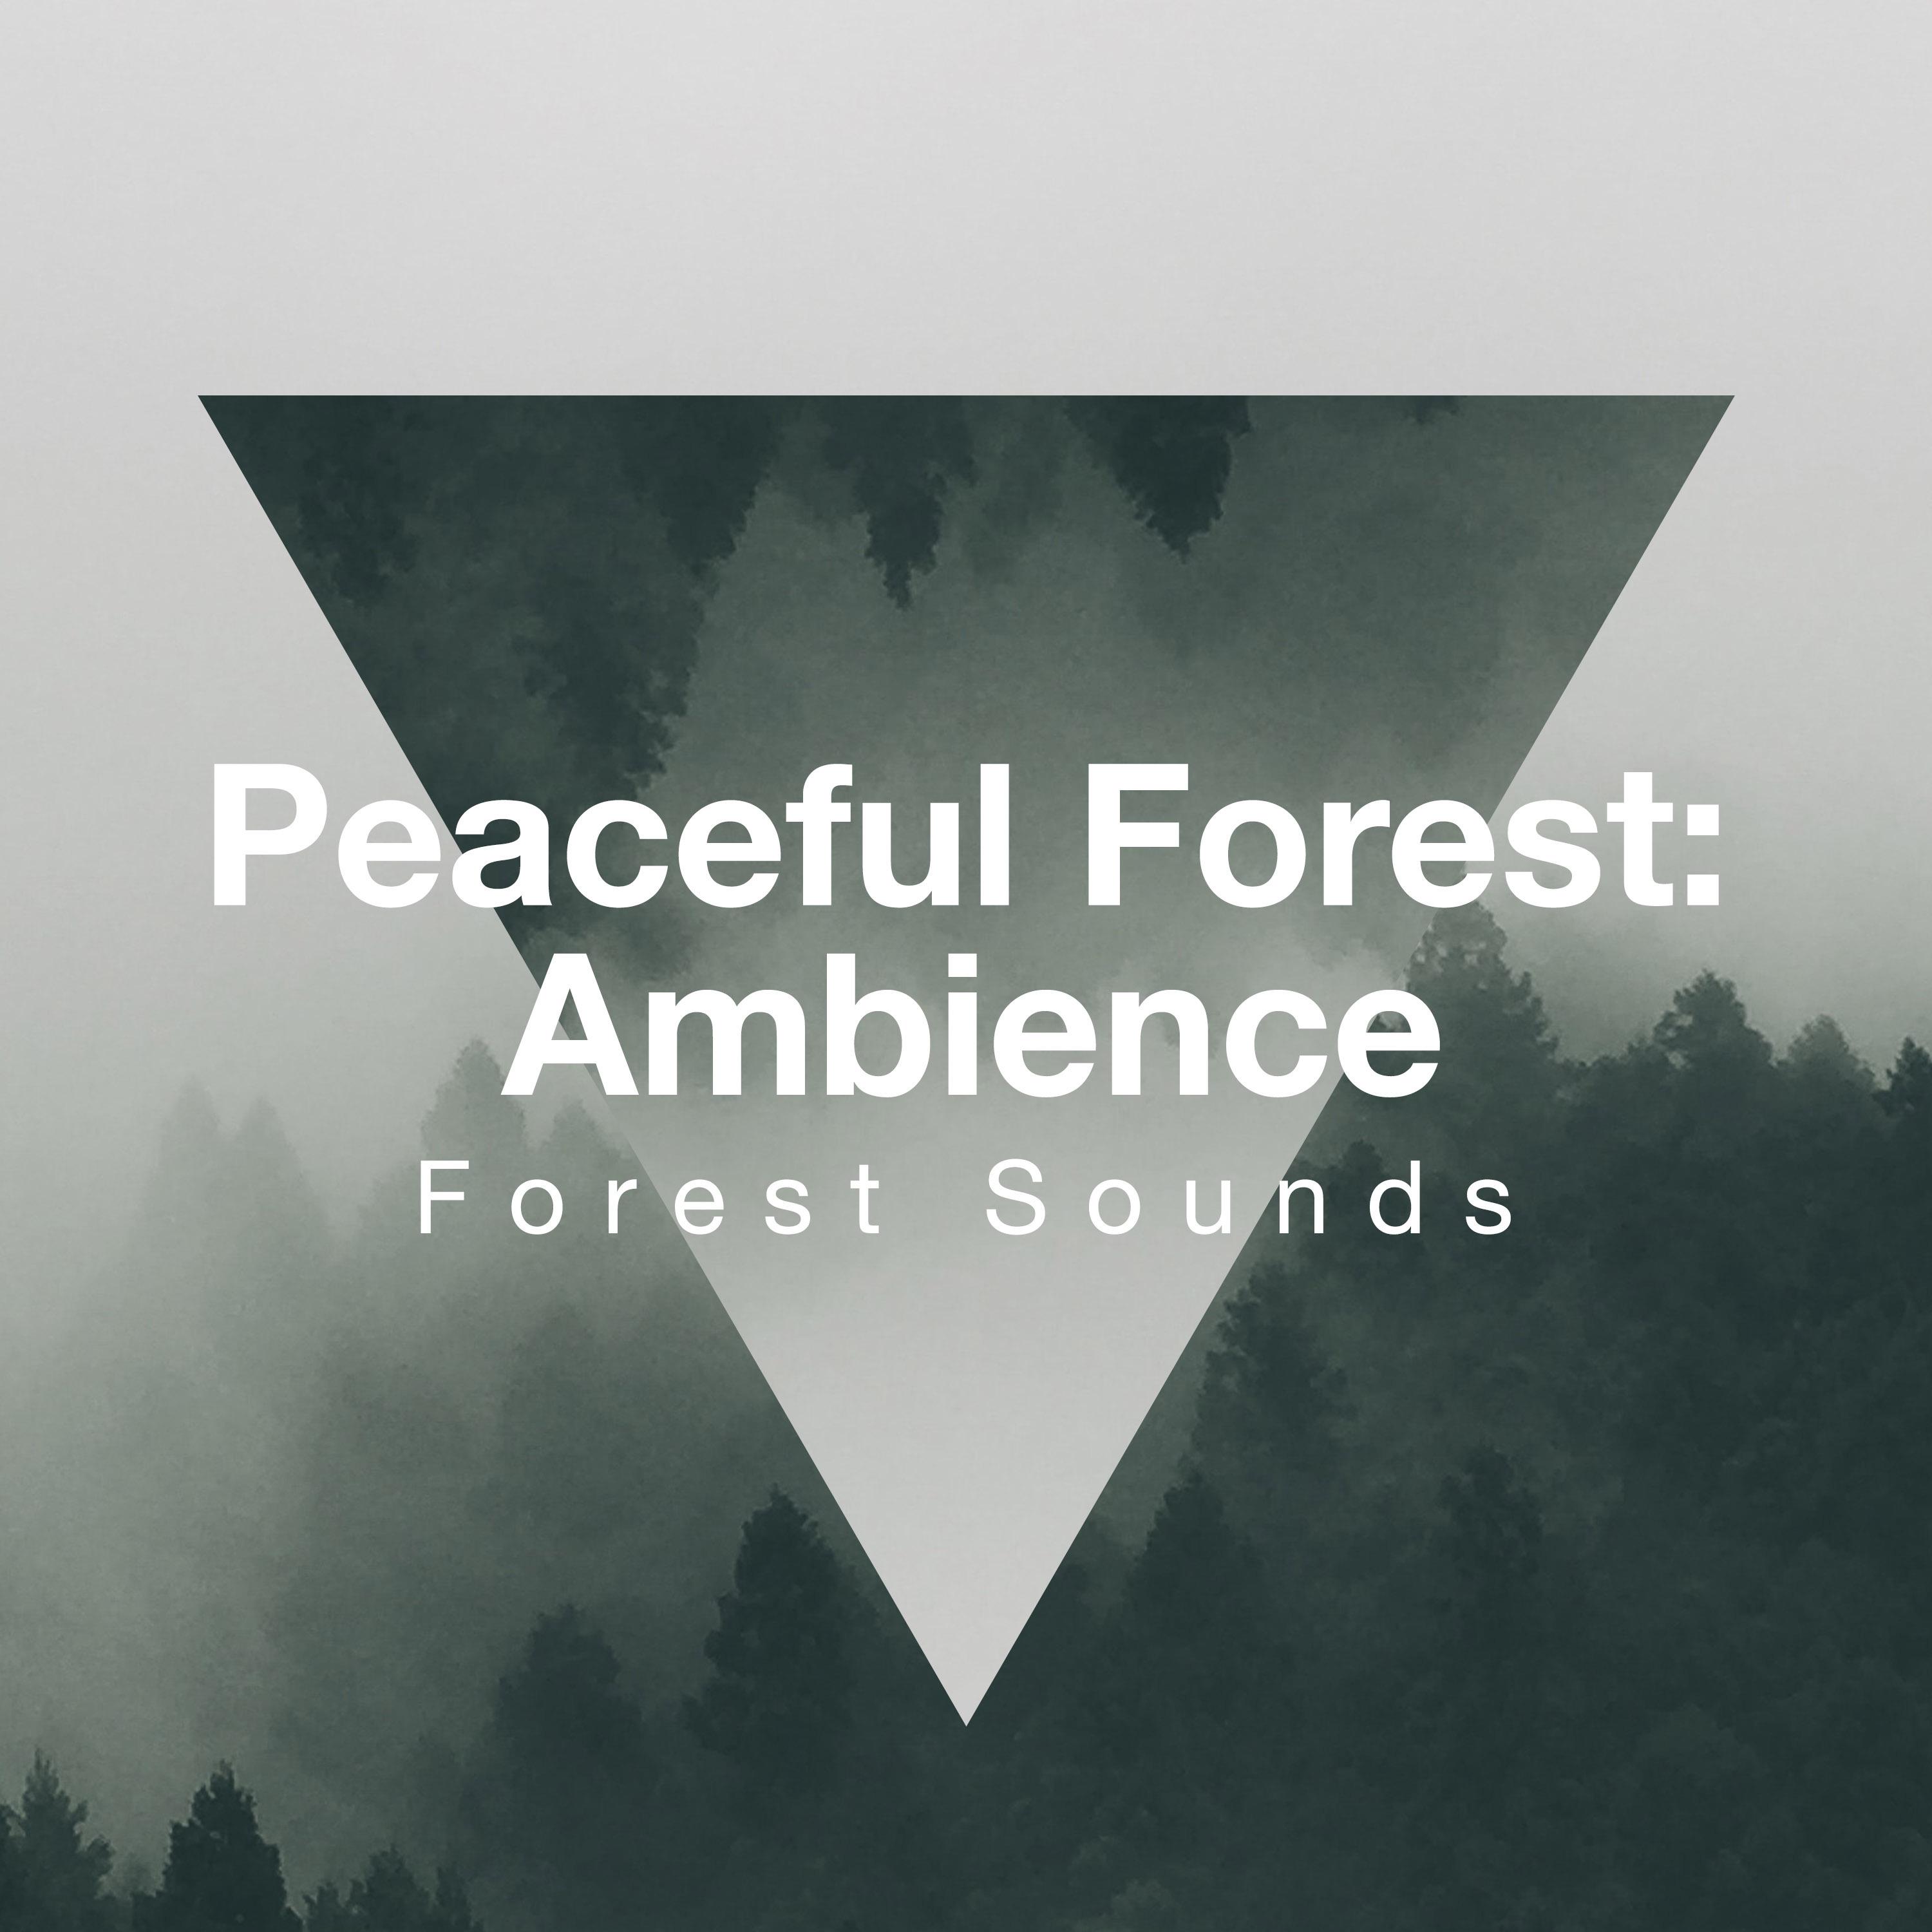 Peaceful Forest: Ambience